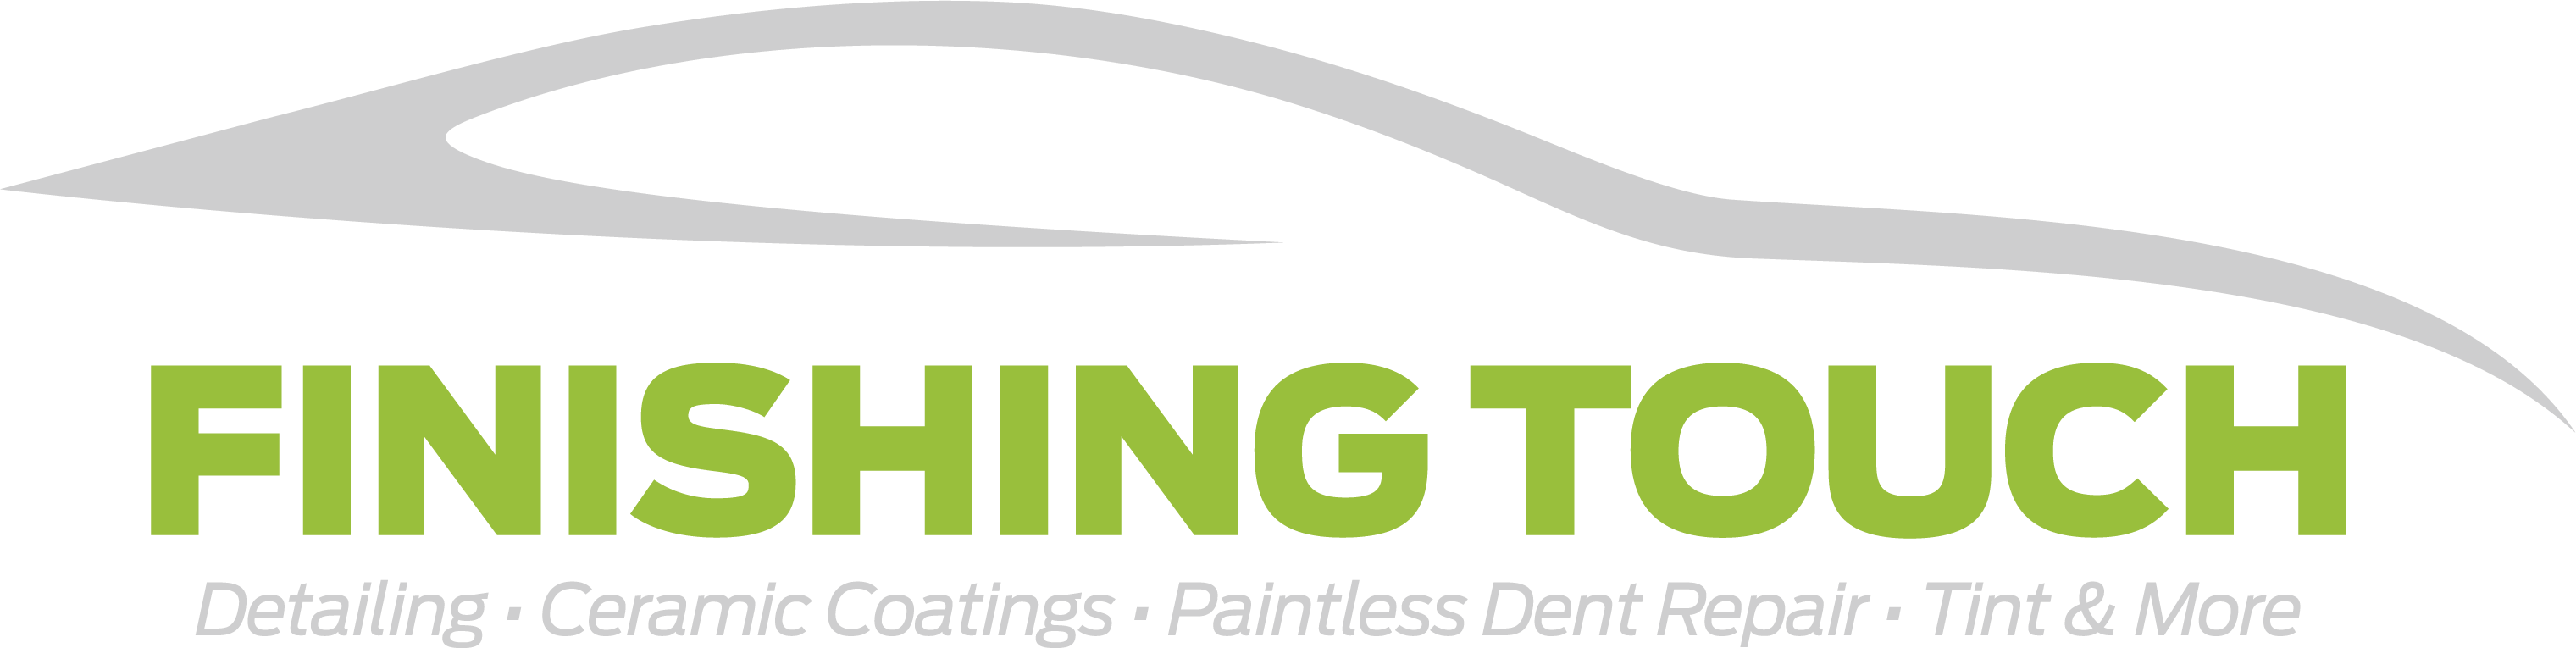 The Finishing Touch Logo